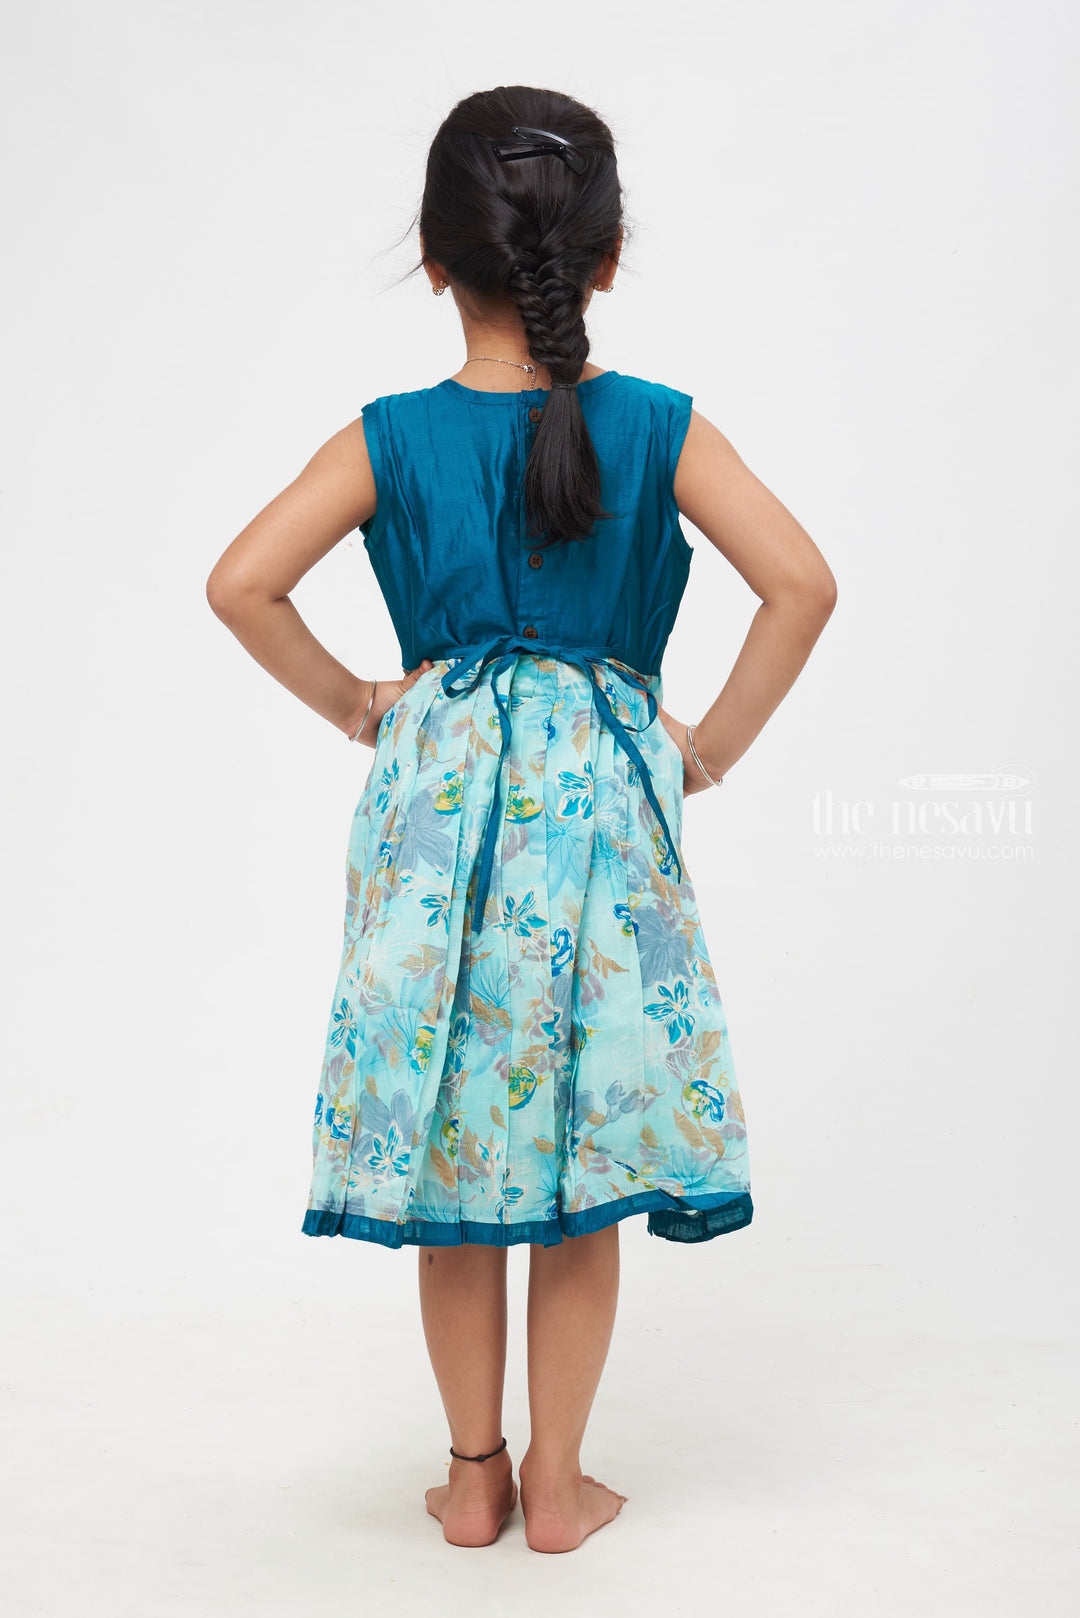 The Nesavu Girls Cotton Frock Natures Beauty in Fabric : Enchanted Teal Floral Fusion Dress with Lace Trimmings Nesavu A Twist to Traditional | Contemporary Cotton Frock Styles for Girls | The Nesavu